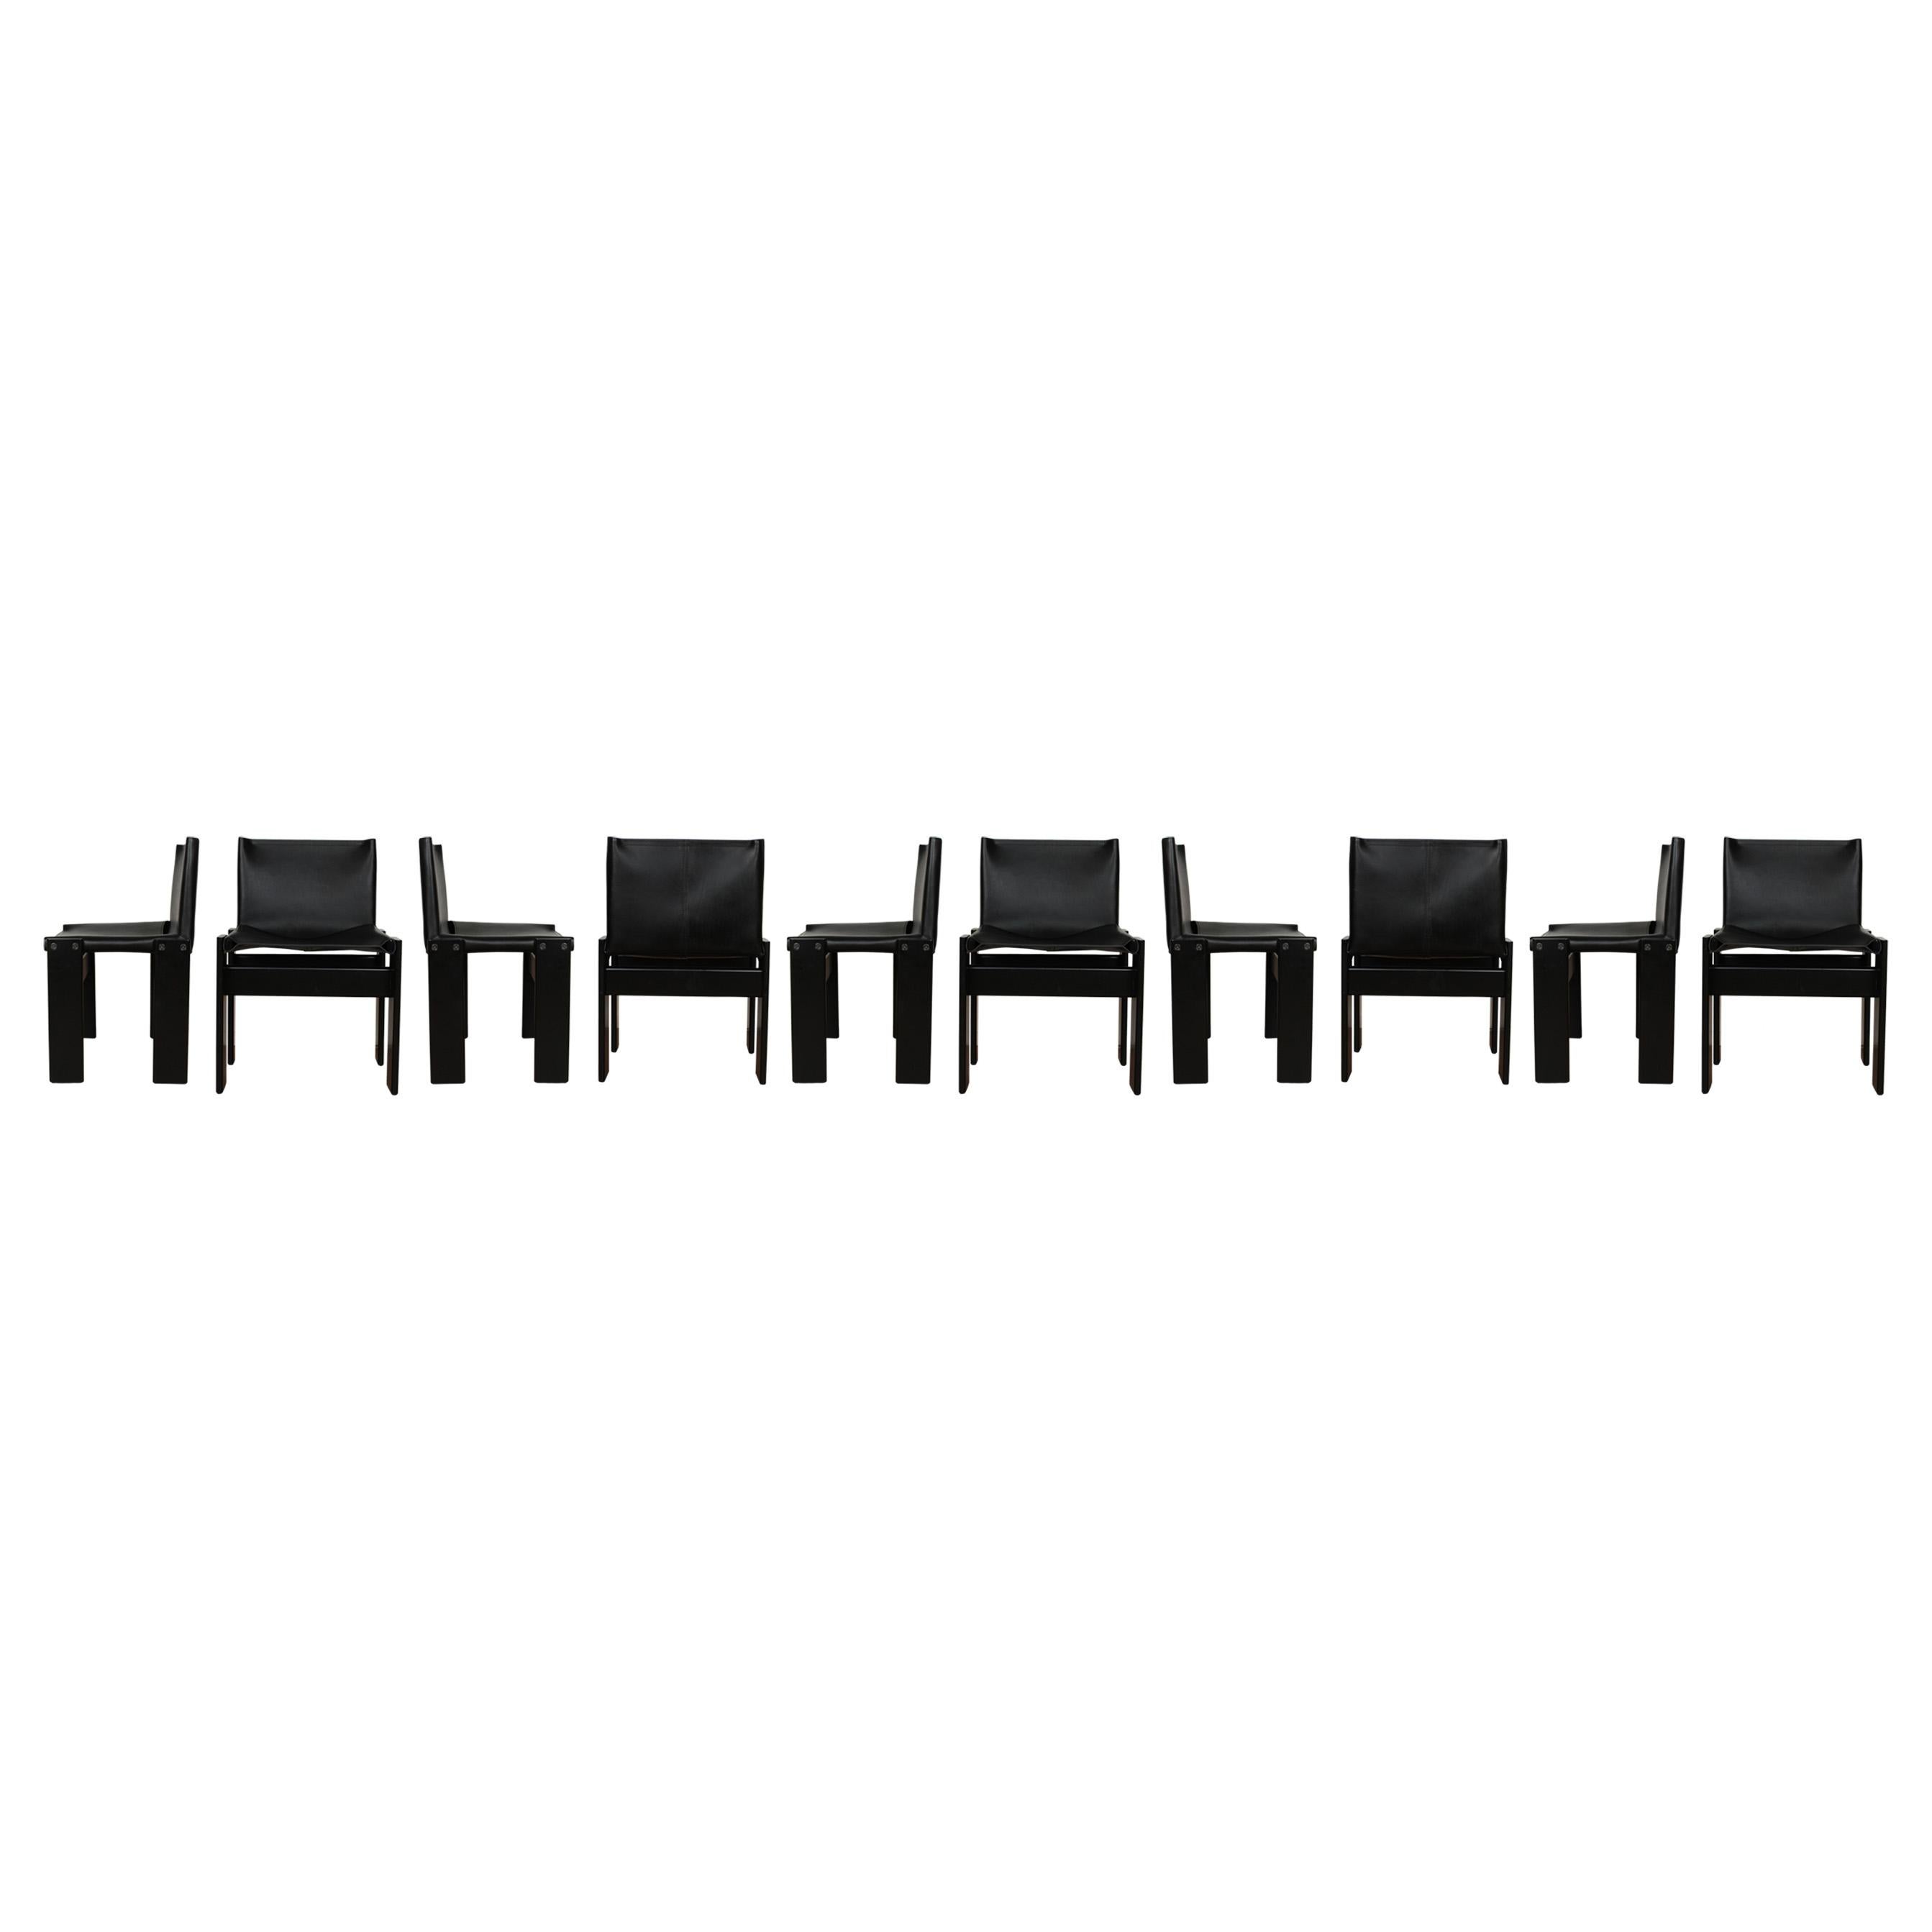 Set of ten “Monk” dining chairs designed by Afra and Tobia Scarpa for Molteni in 1973.
Made of black leather and black lacquered beech wood.
Fully restored in Italy.

Interesting is the ‘flat’ shape of this chair where the designer has chosen to